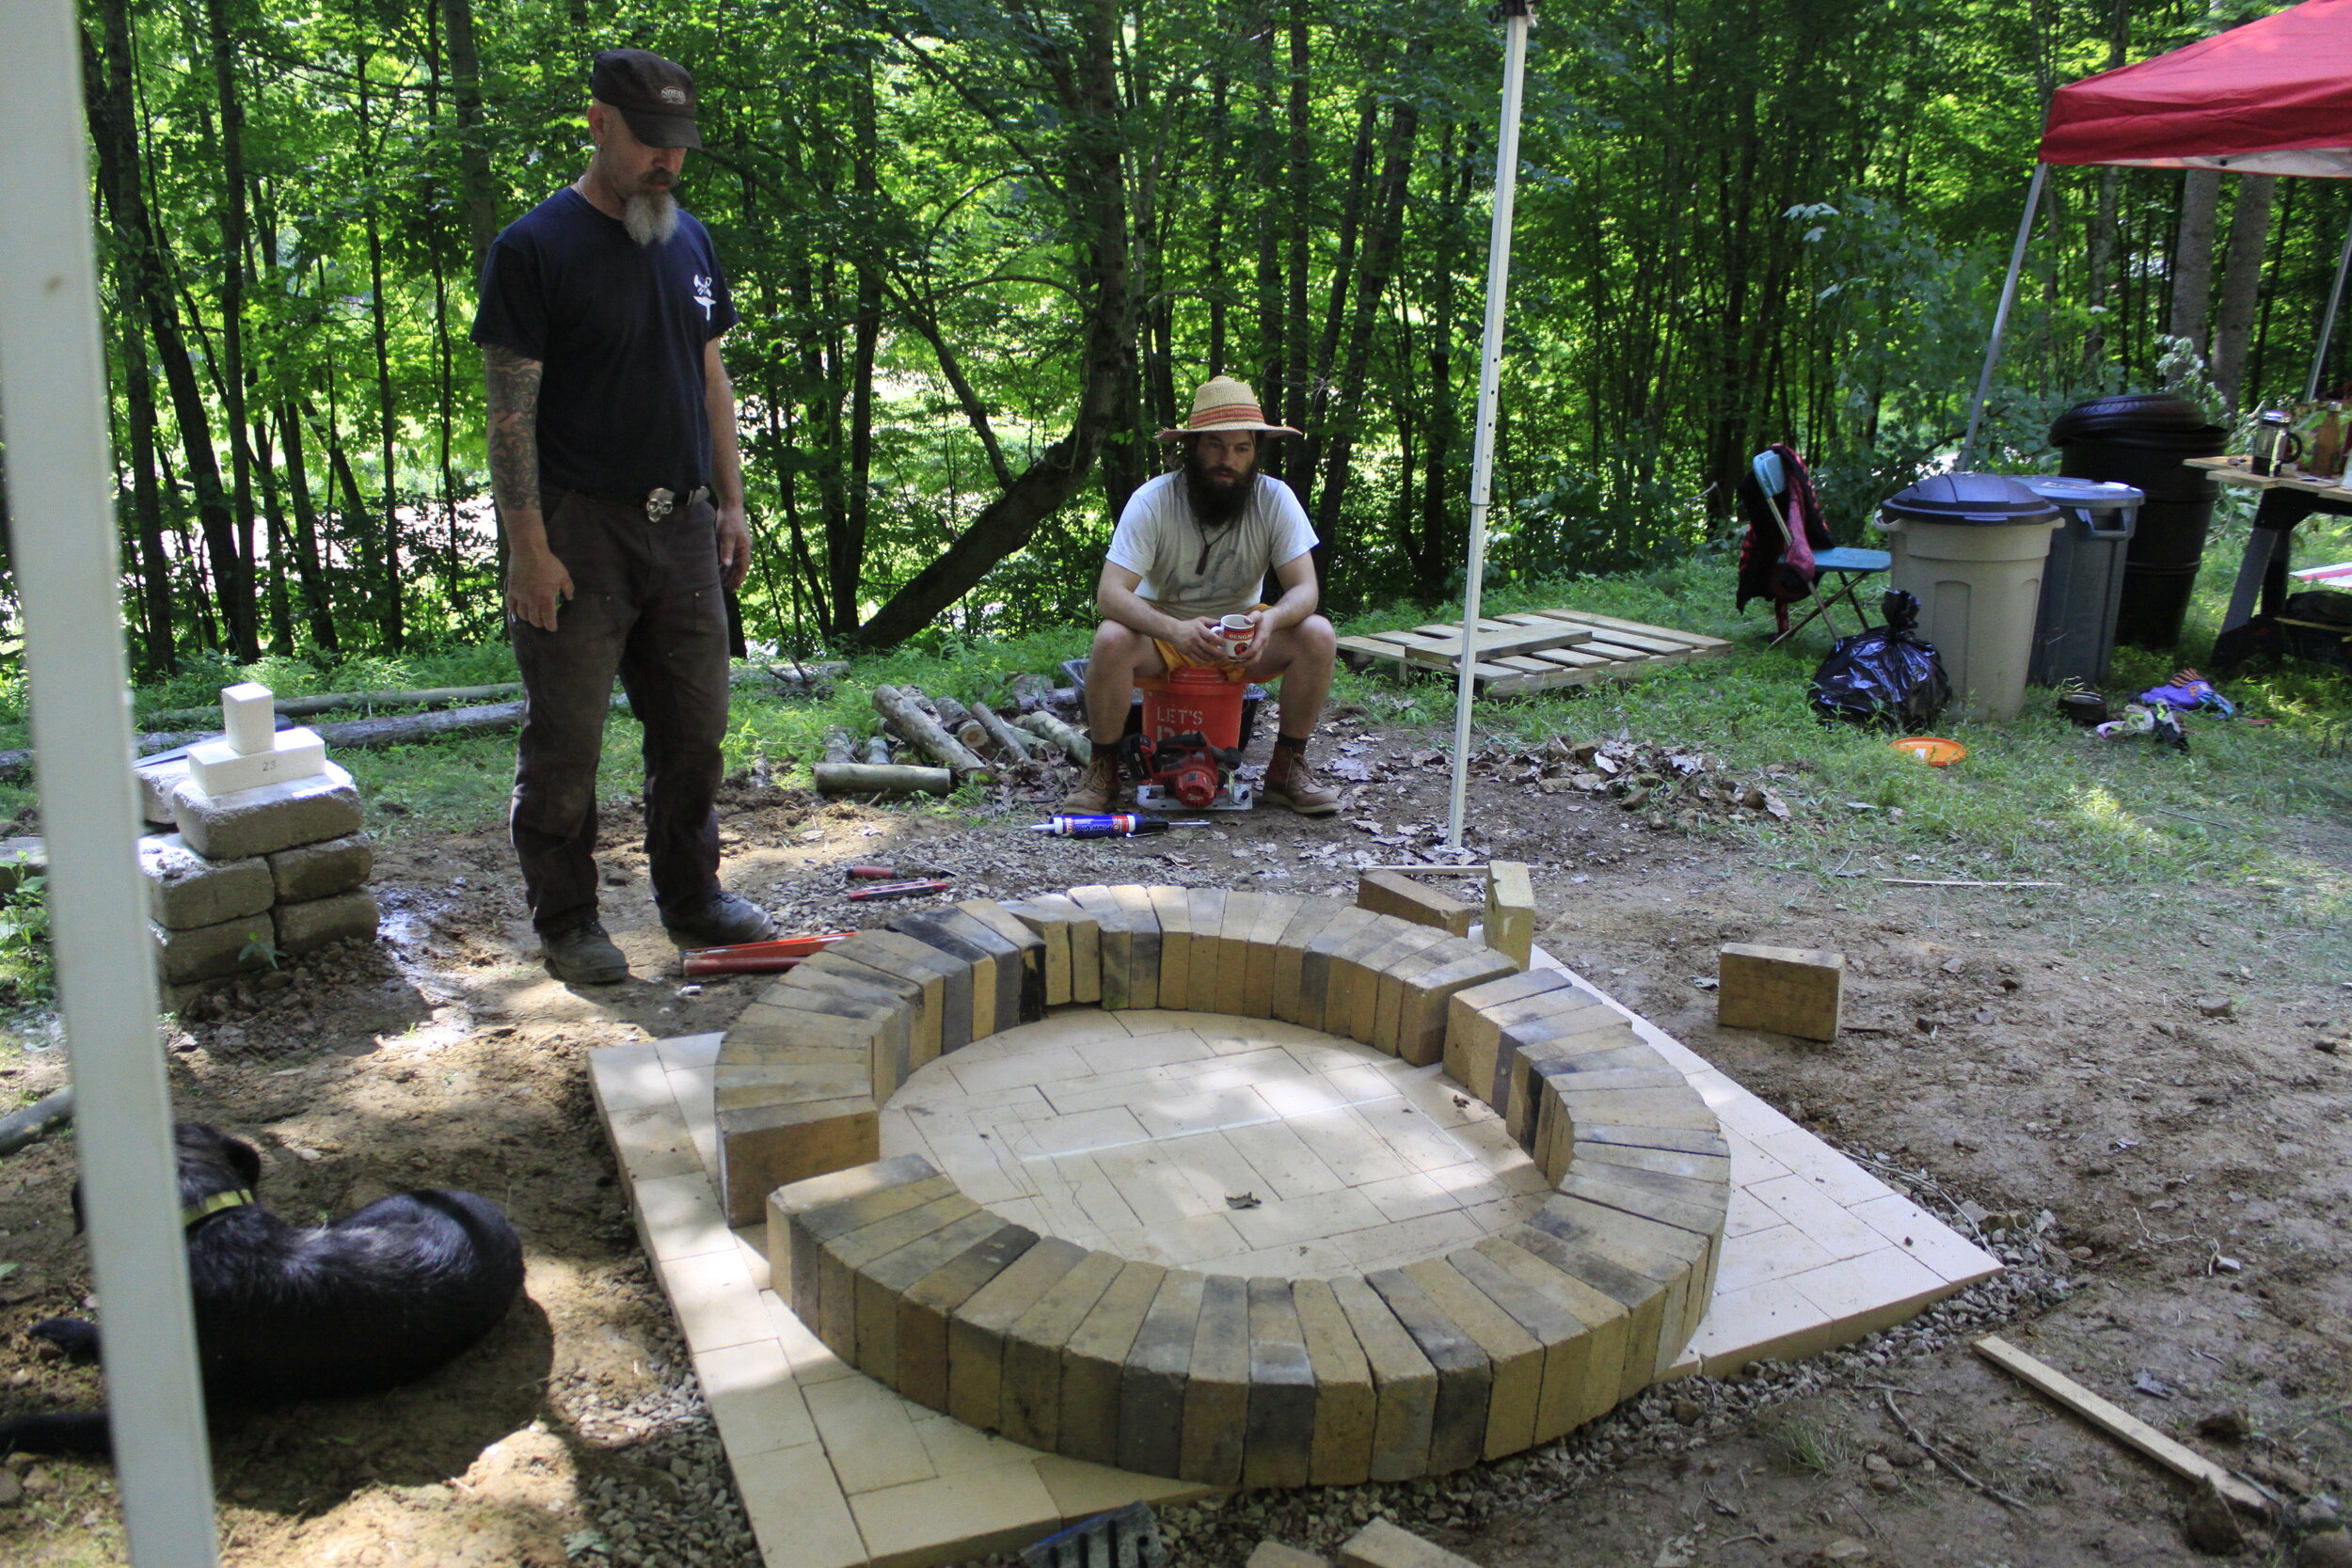  Southern Ohio is rich in clay and has a storied history of kilns and ceramic artists. Ohio is a national leader in mining and manufacturing clay and shale. Our catenary arch wood kiln will be used for creating new work with the surrounding clay as w